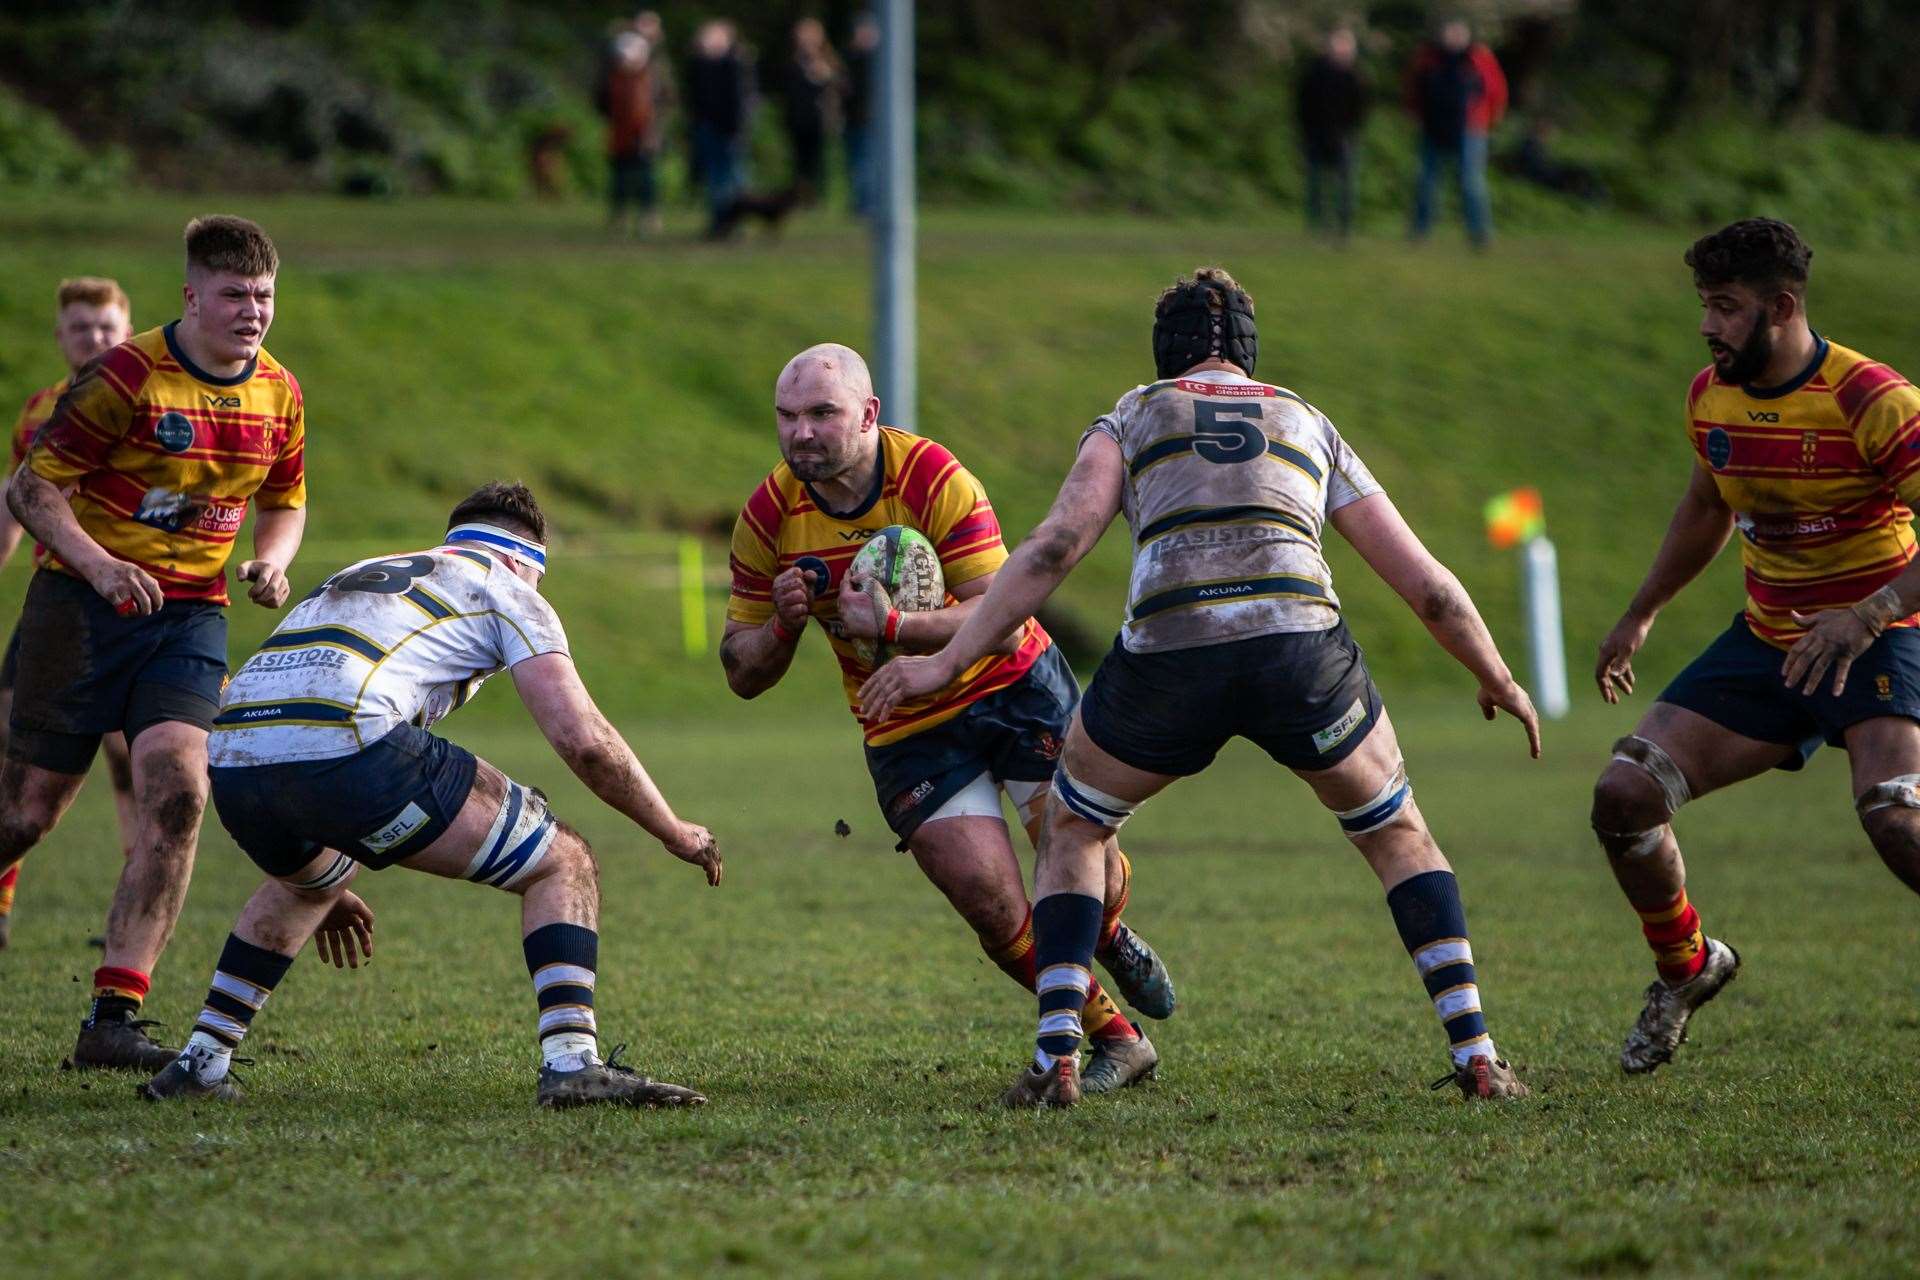 Medway captain Tom Beaumont, with Josh Knight and Mo Pangarker in support against Tunbridge Wells